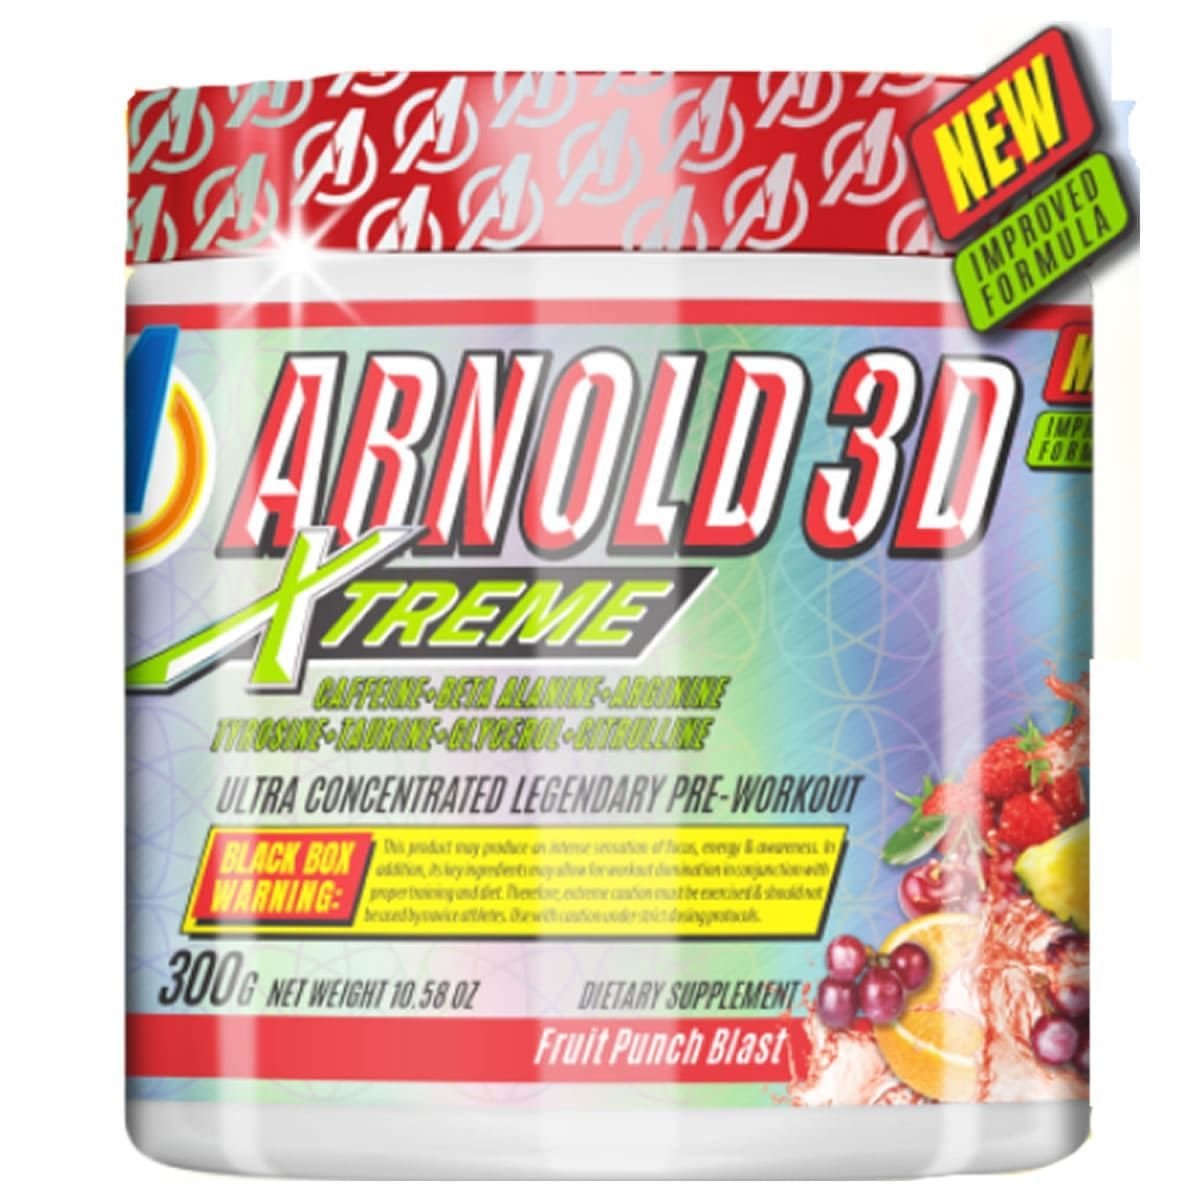 Arnold 3D Xtreme - Arnold Nutrition (300g)